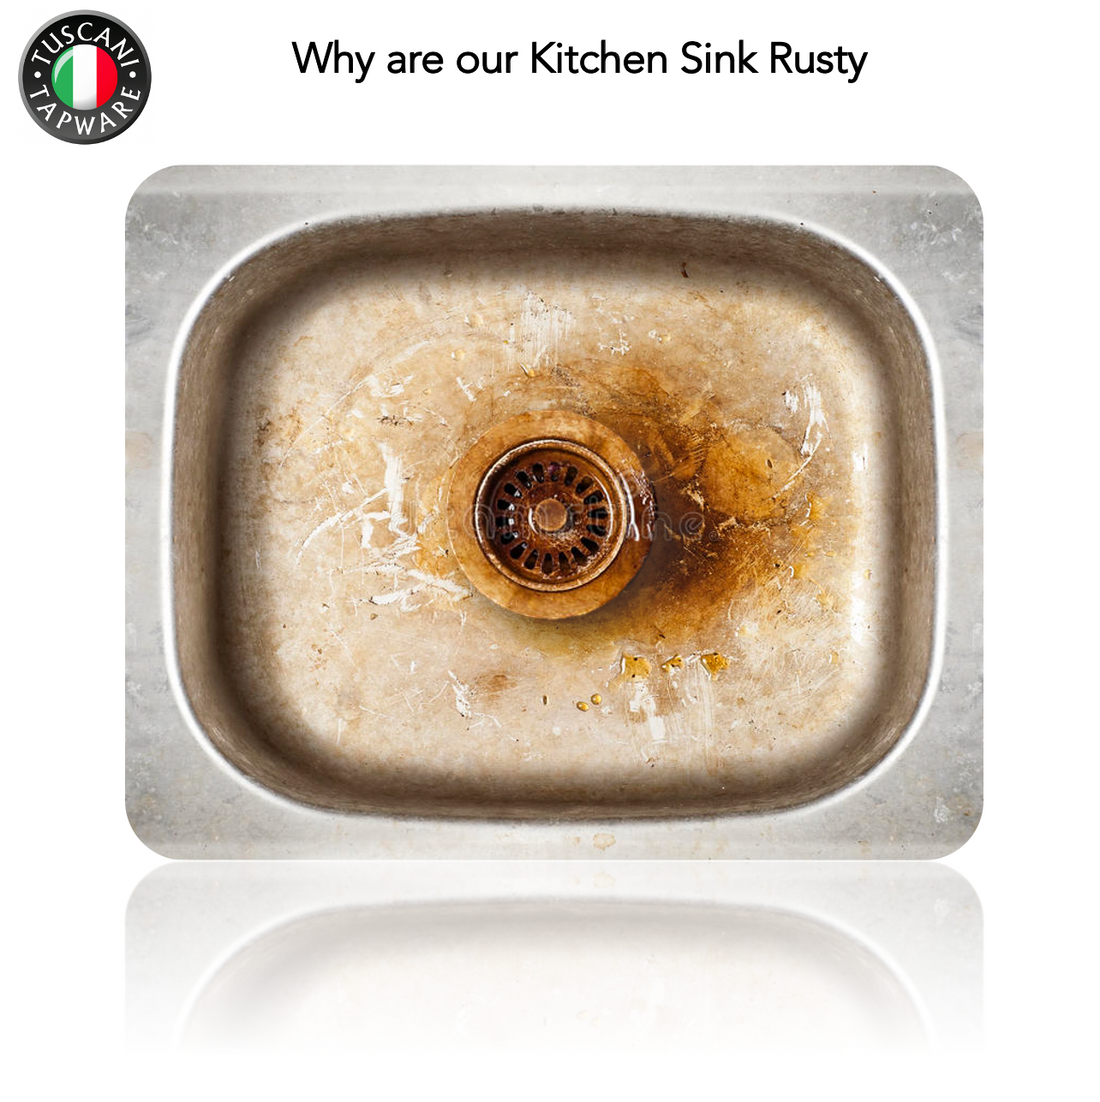 Why our Kitchen Sink is Rusty